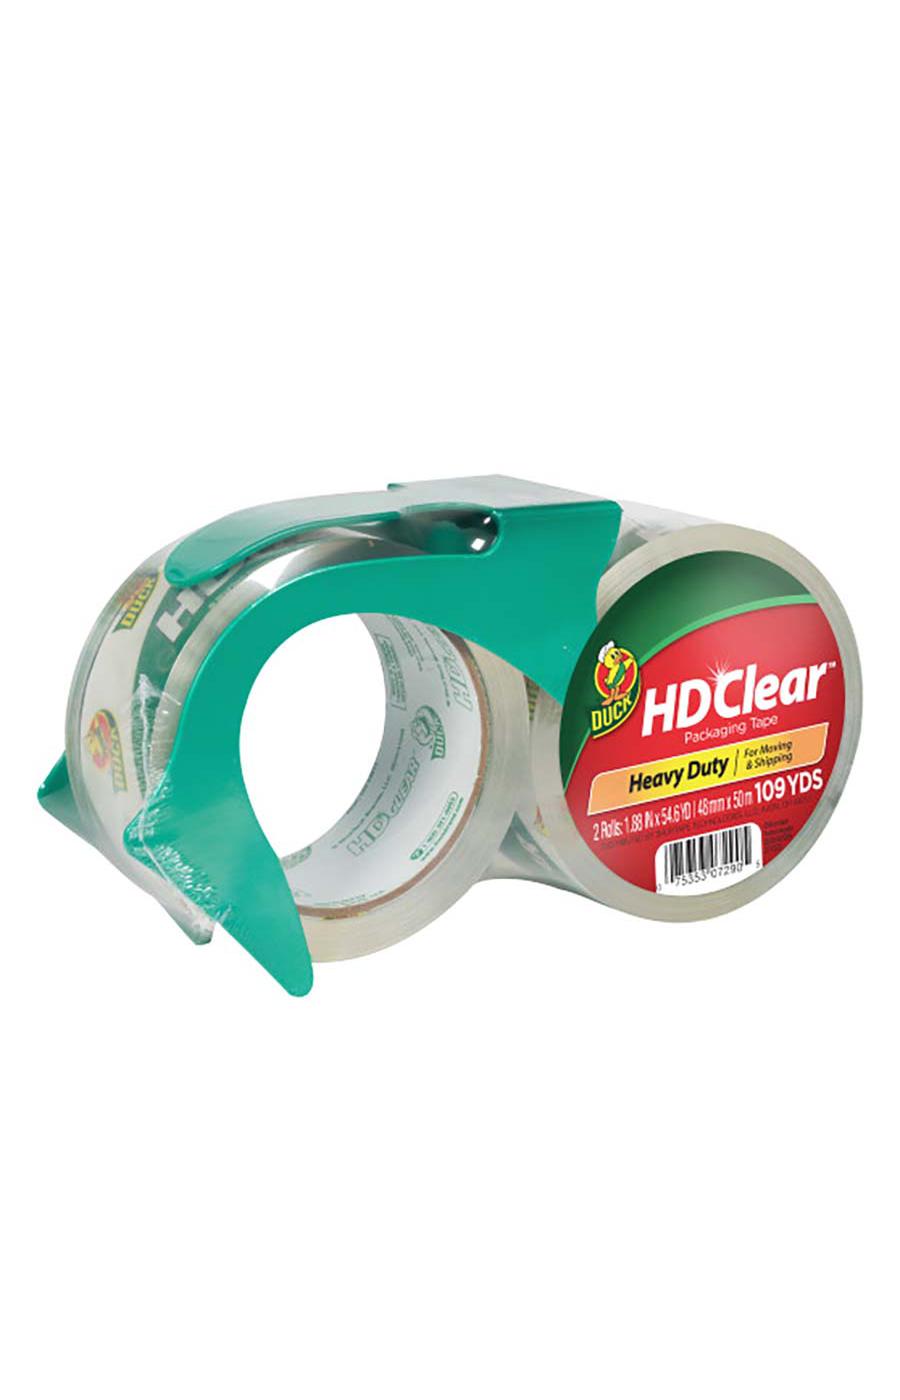 Duck HD Clear Heavy Duty Packing Tape with Dispenser; image 1 of 4